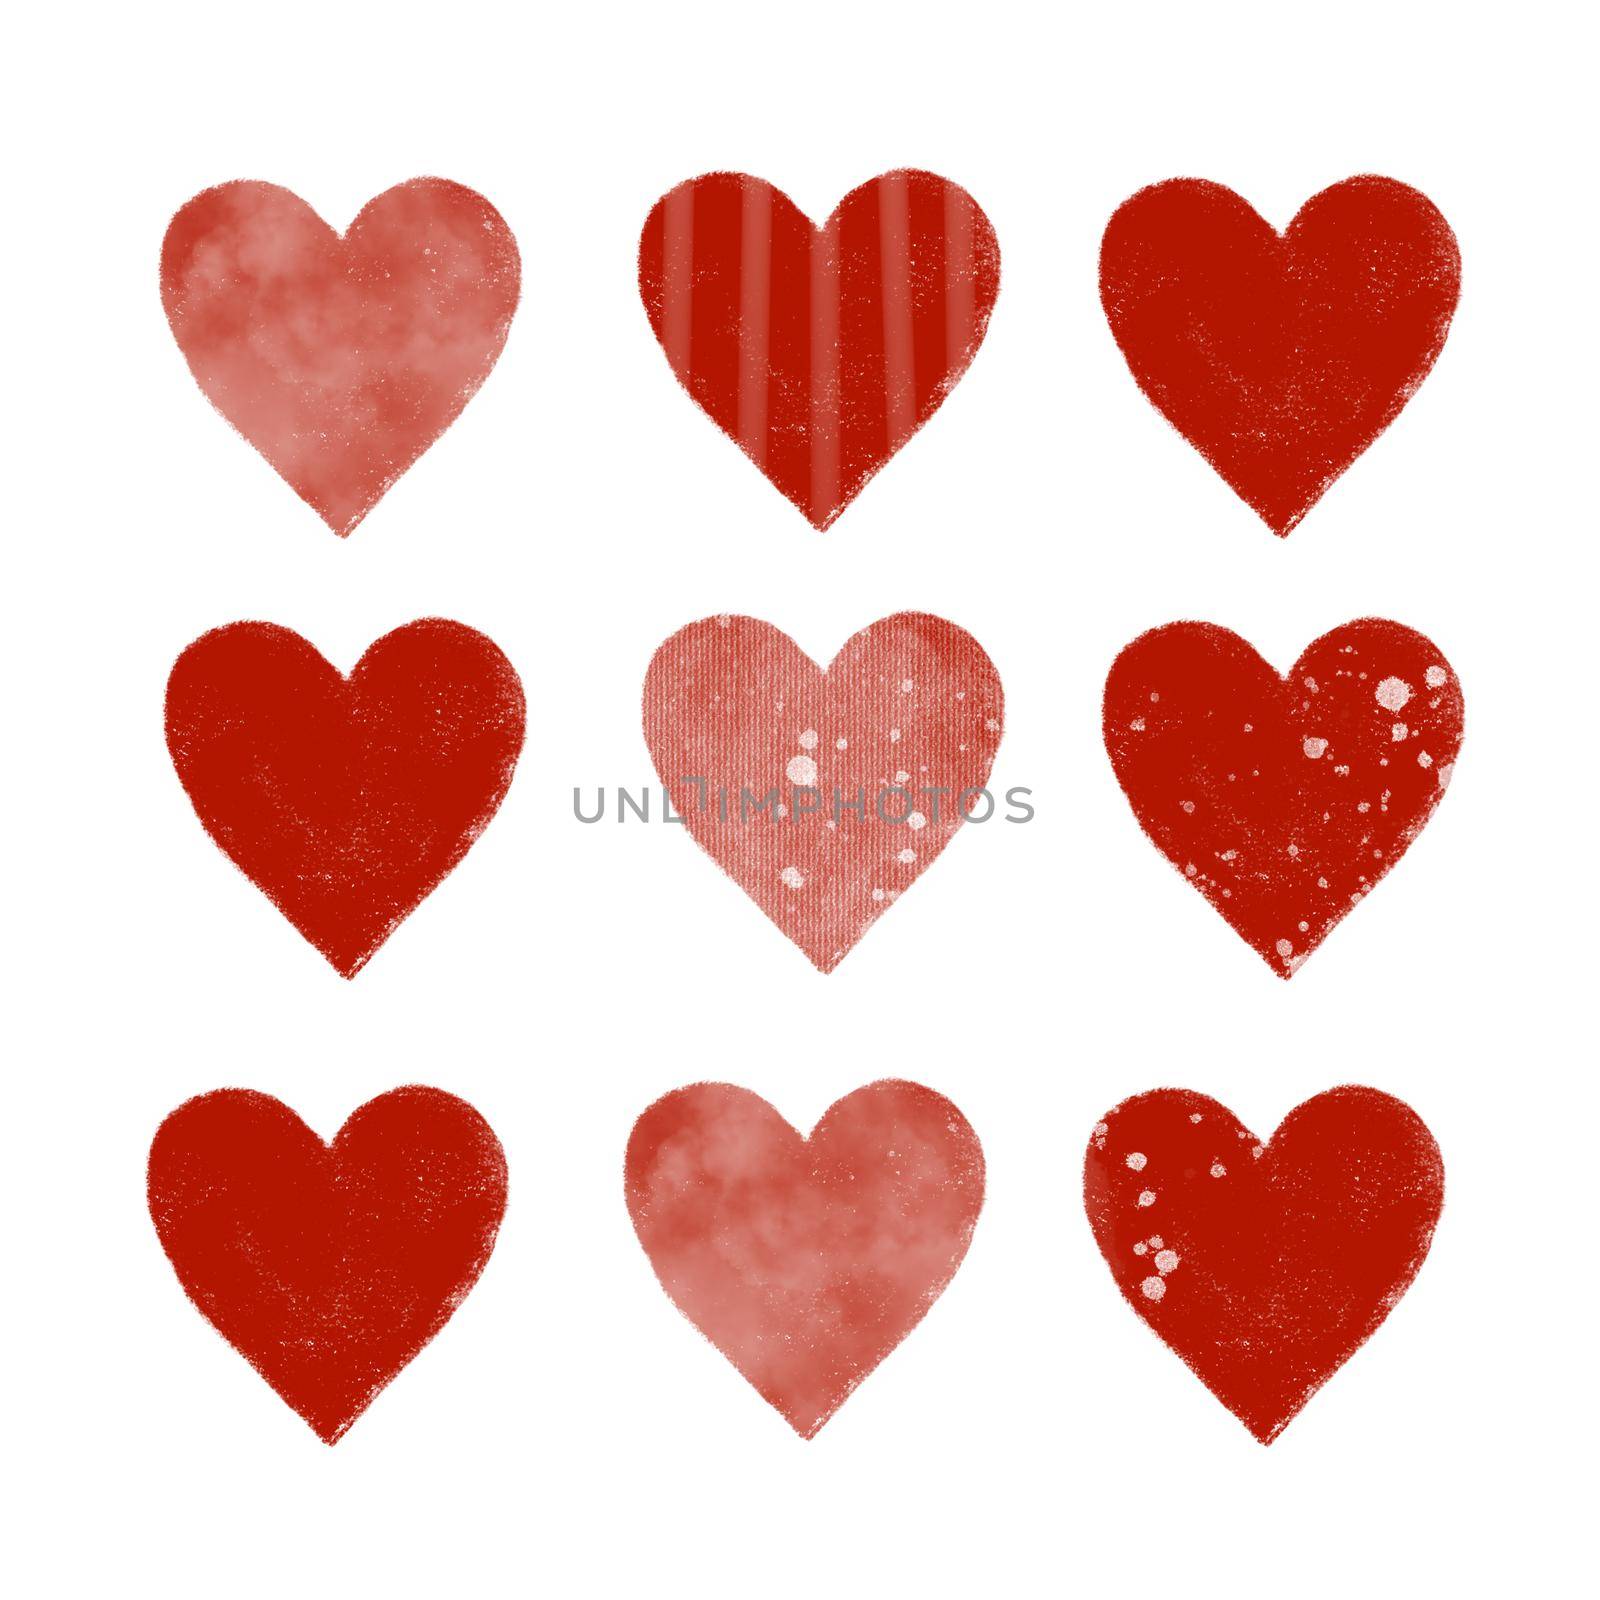 Hand drawn red hearts illustration isolated on white background. Bright pattern for Saint Valentine's day. Watercolor ornament. Cute cartoon drawing. Love, tenderness, care and friendship concept